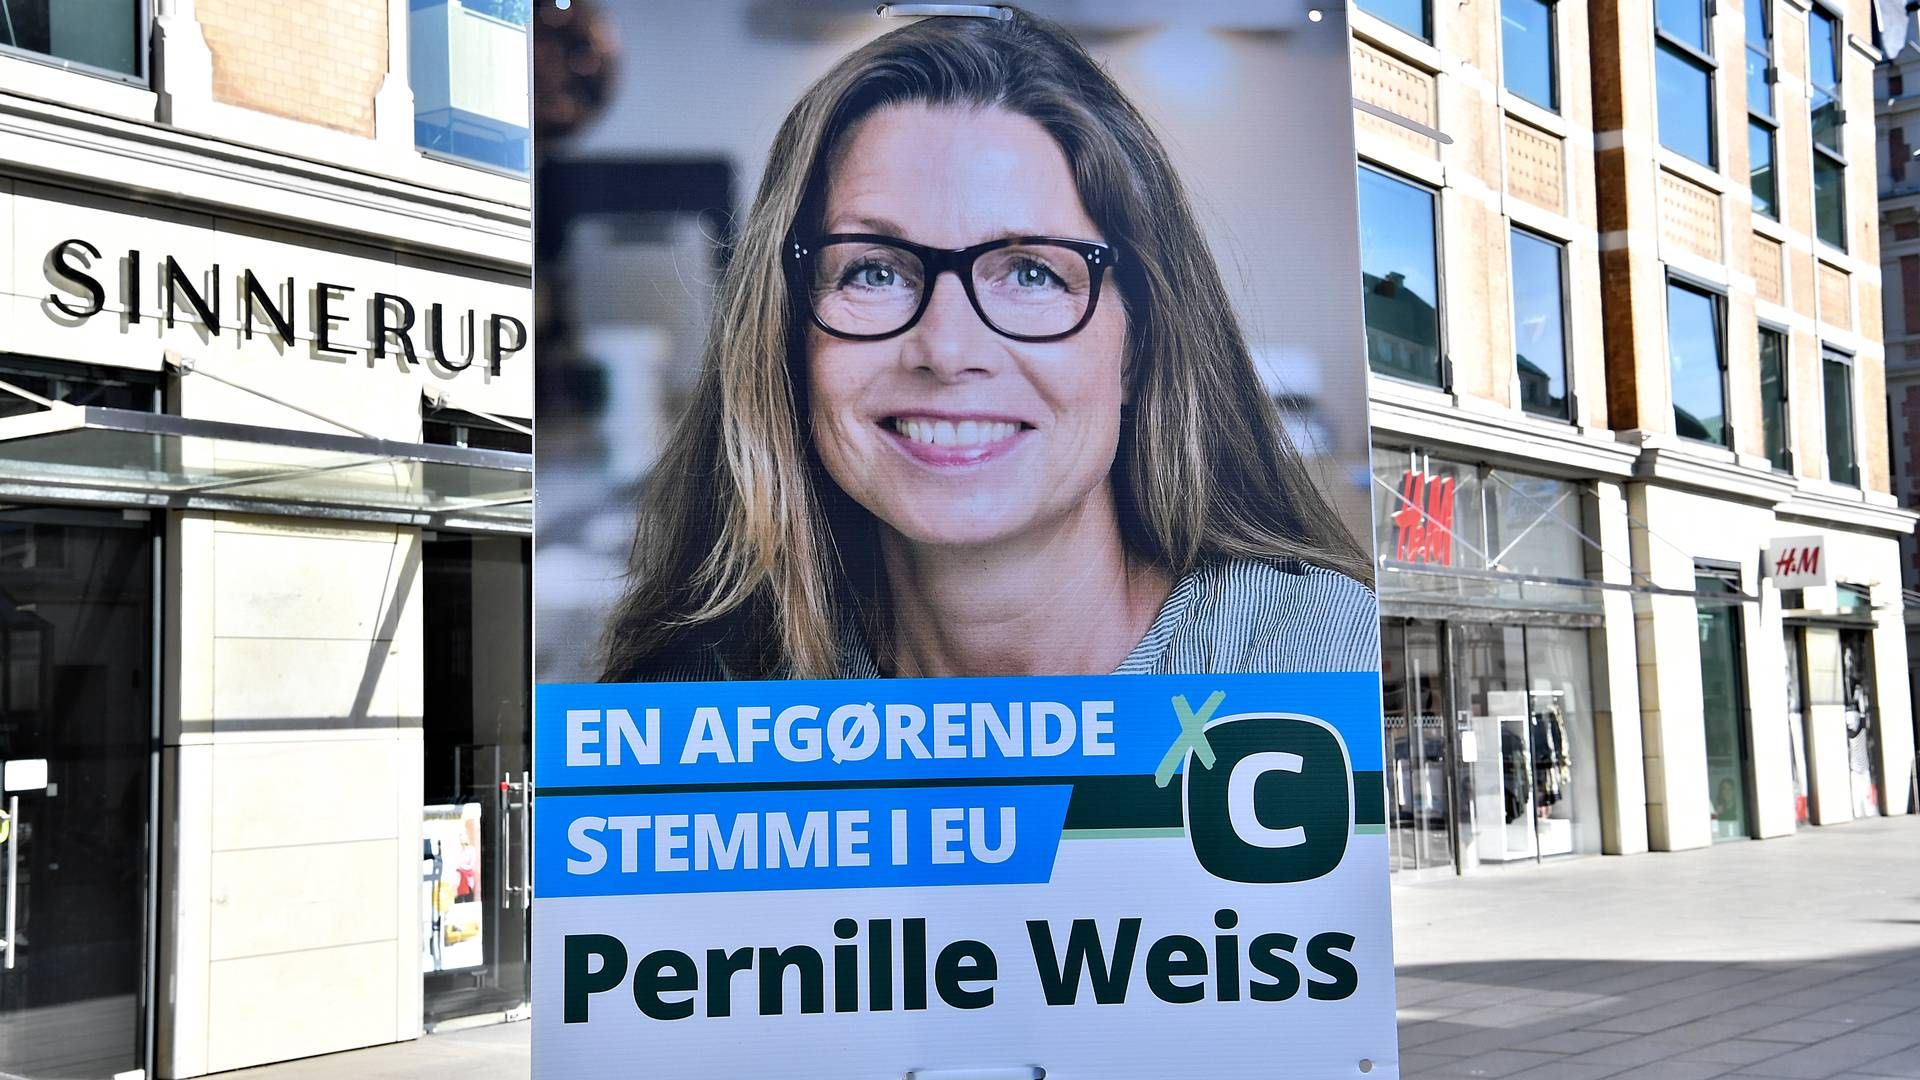 Danish campaign poster for Pernille Weiss | Photo: Ernst van Norde